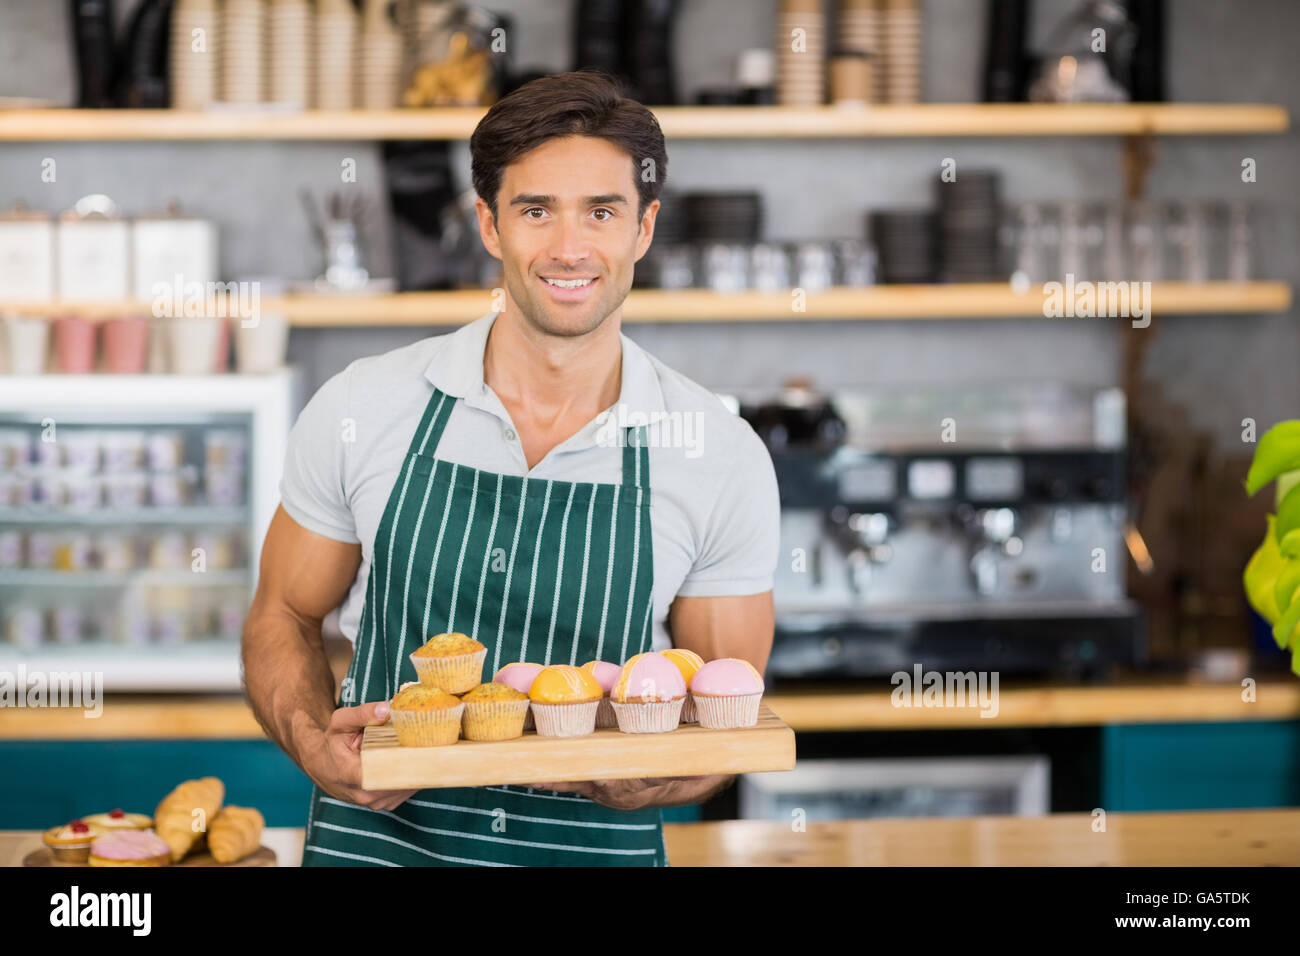 Portrait of smiling waiter holding a tray of cupcakes Stock Photo